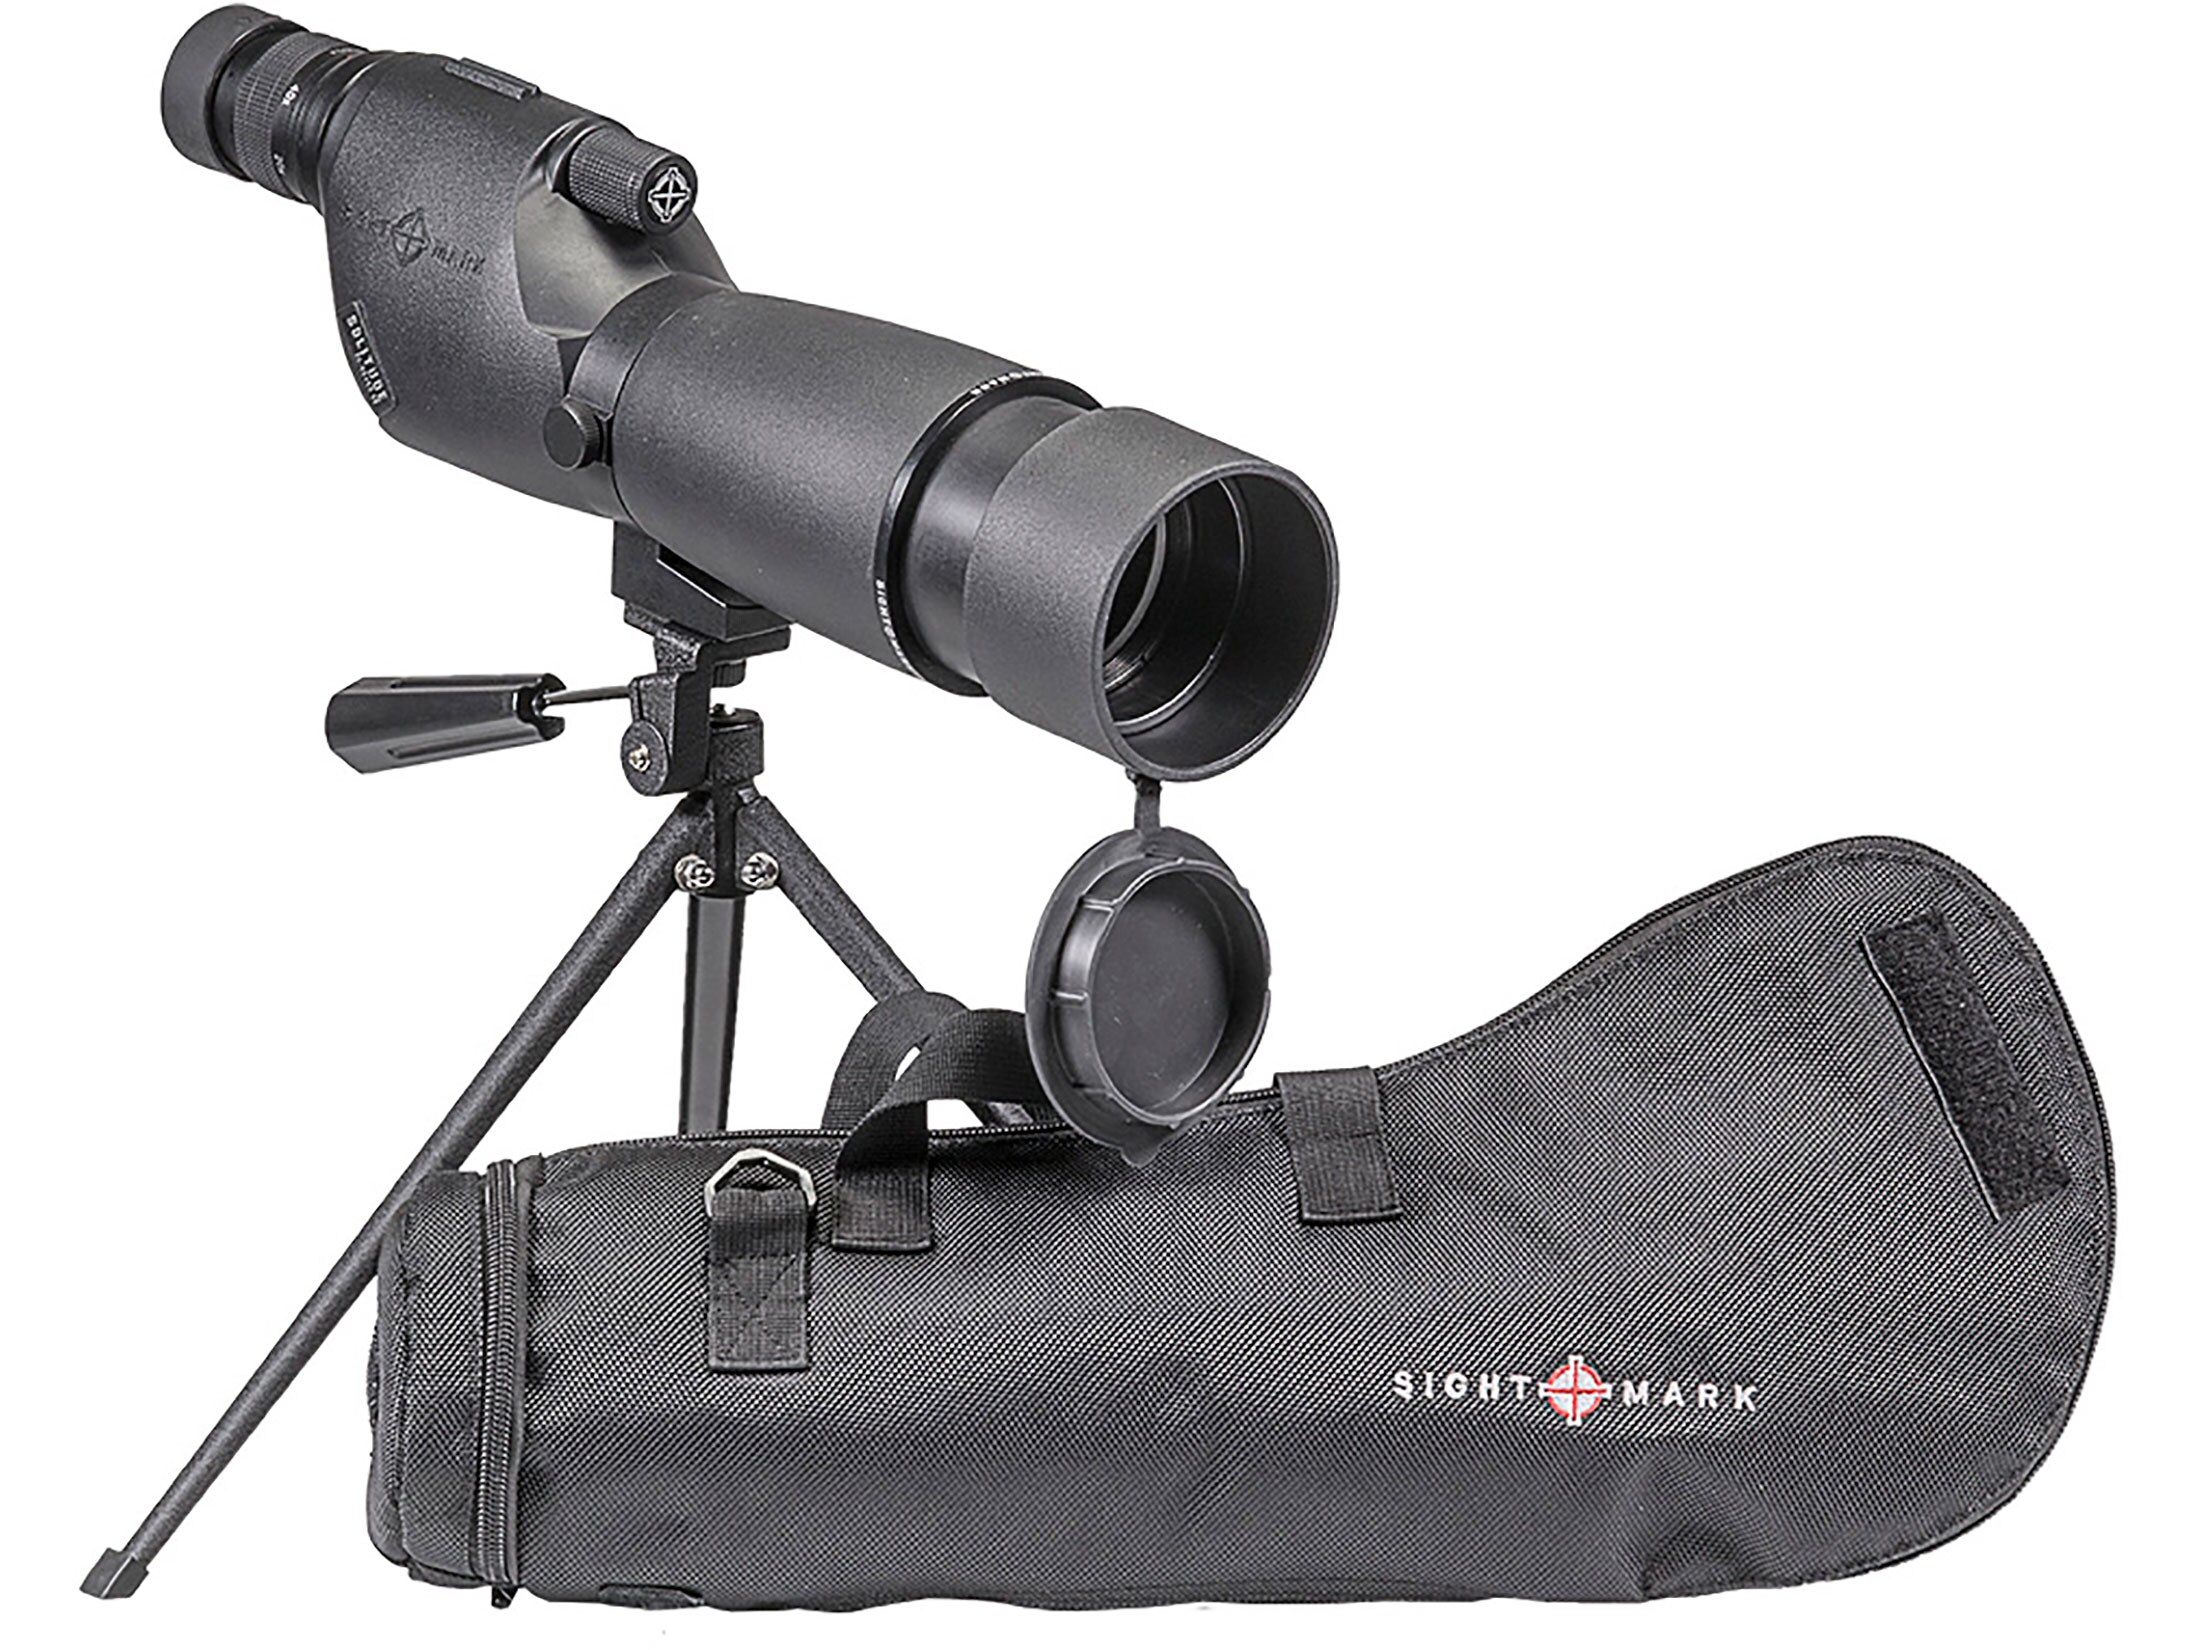 Sightmark Solitude Spotting Scope 20-60x 60mm Matte with Case, Lens Covers and Tripod For Sale